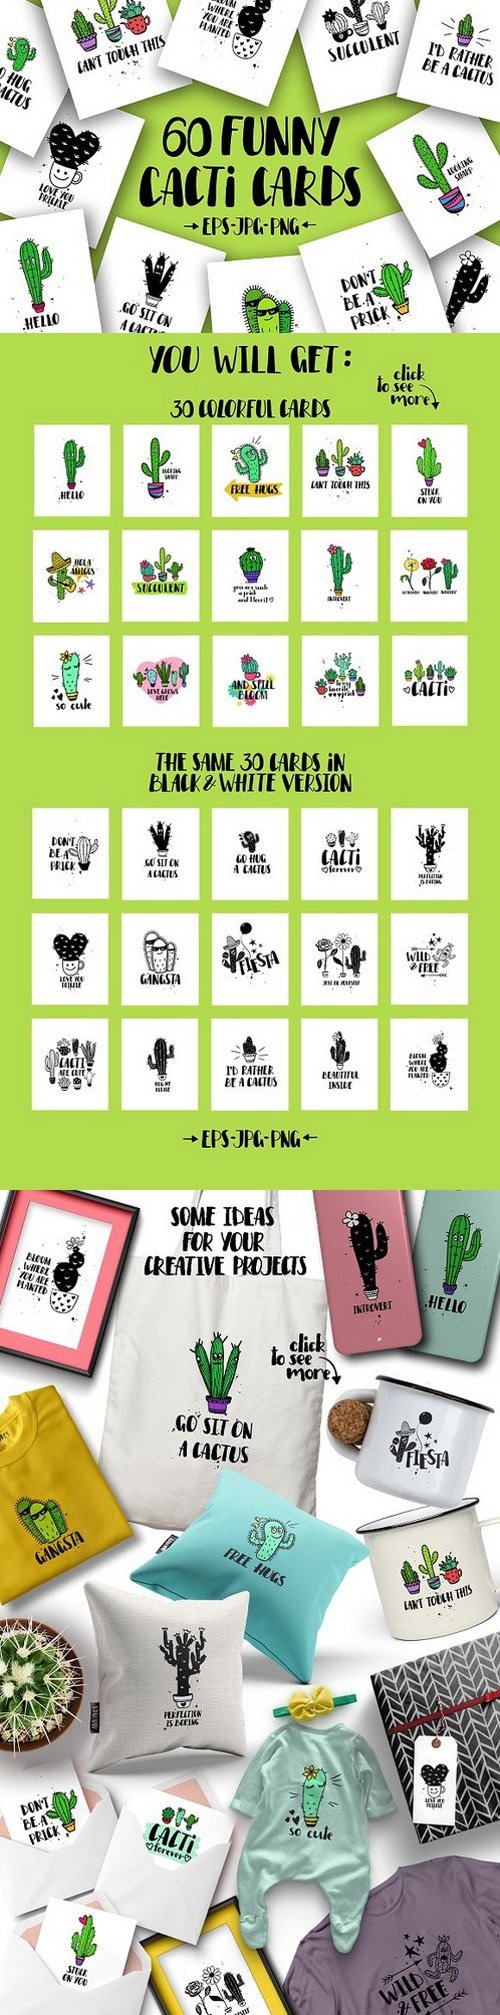 Cacti Cards 1519219